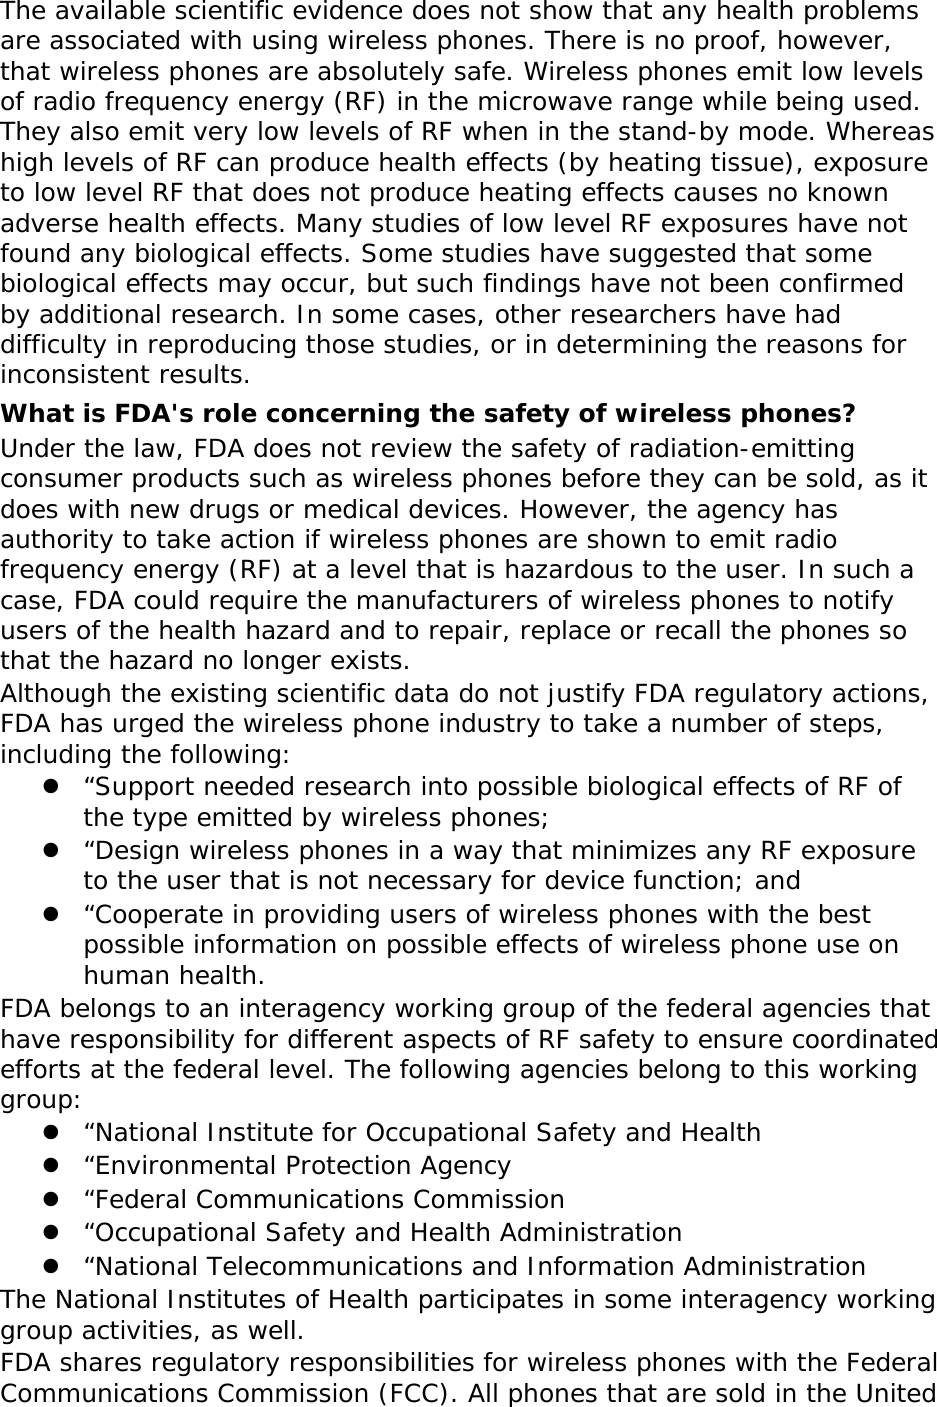 The available scientific evidence does not show that any health problems are associated with using wireless phones. There is no proof, however, that wireless phones are absolutely safe. Wireless phones emit low levels of radio frequency energy (RF) in the microwave range while being used. They also emit very low levels of RF when in the stand-by mode. Whereas high levels of RF can produce health effects (by heating tissue), exposure to low level RF that does not produce heating effects causes no known adverse health effects. Many studies of low level RF exposures have not found any biological effects. Some studies have suggested that some biological effects may occur, but such findings have not been confirmed by additional research. In some cases, other researchers have had difficulty in reproducing those studies, or in determining the reasons for inconsistent results. What is FDA&apos;s role concerning the safety of wireless phones? Under the law, FDA does not review the safety of radiation-emitting consumer products such as wireless phones before they can be sold, as it does with new drugs or medical devices. However, the agency has authority to take action if wireless phones are shown to emit radio frequency energy (RF) at a level that is hazardous to the user. In such a case, FDA could require the manufacturers of wireless phones to notify users of the health hazard and to repair, replace or recall the phones so that the hazard no longer exists. Although the existing scientific data do not justify FDA regulatory actions, FDA has urged the wireless phone industry to take a number of steps, including the following:  “Support needed research into possible biological effects of RF of the type emitted by wireless phones;  “Design wireless phones in a way that minimizes any RF exposure to the user that is not necessary for device function; and  “Cooperate in providing users of wireless phones with the best possible information on possible effects of wireless phone use on human health. FDA belongs to an interagency working group of the federal agencies that have responsibility for different aspects of RF safety to ensure coordinated efforts at the federal level. The following agencies belong to this working group:  “National Institute for Occupational Safety and Health  “Environmental Protection Agency  “Federal Communications Commission  “Occupational Safety and Health Administration  “National Telecommunications and Information Administration The National Institutes of Health participates in some interagency working group activities, as well. FDA shares regulatory responsibilities for wireless phones with the Federal Communications Commission (FCC). All phones that are sold in the United 